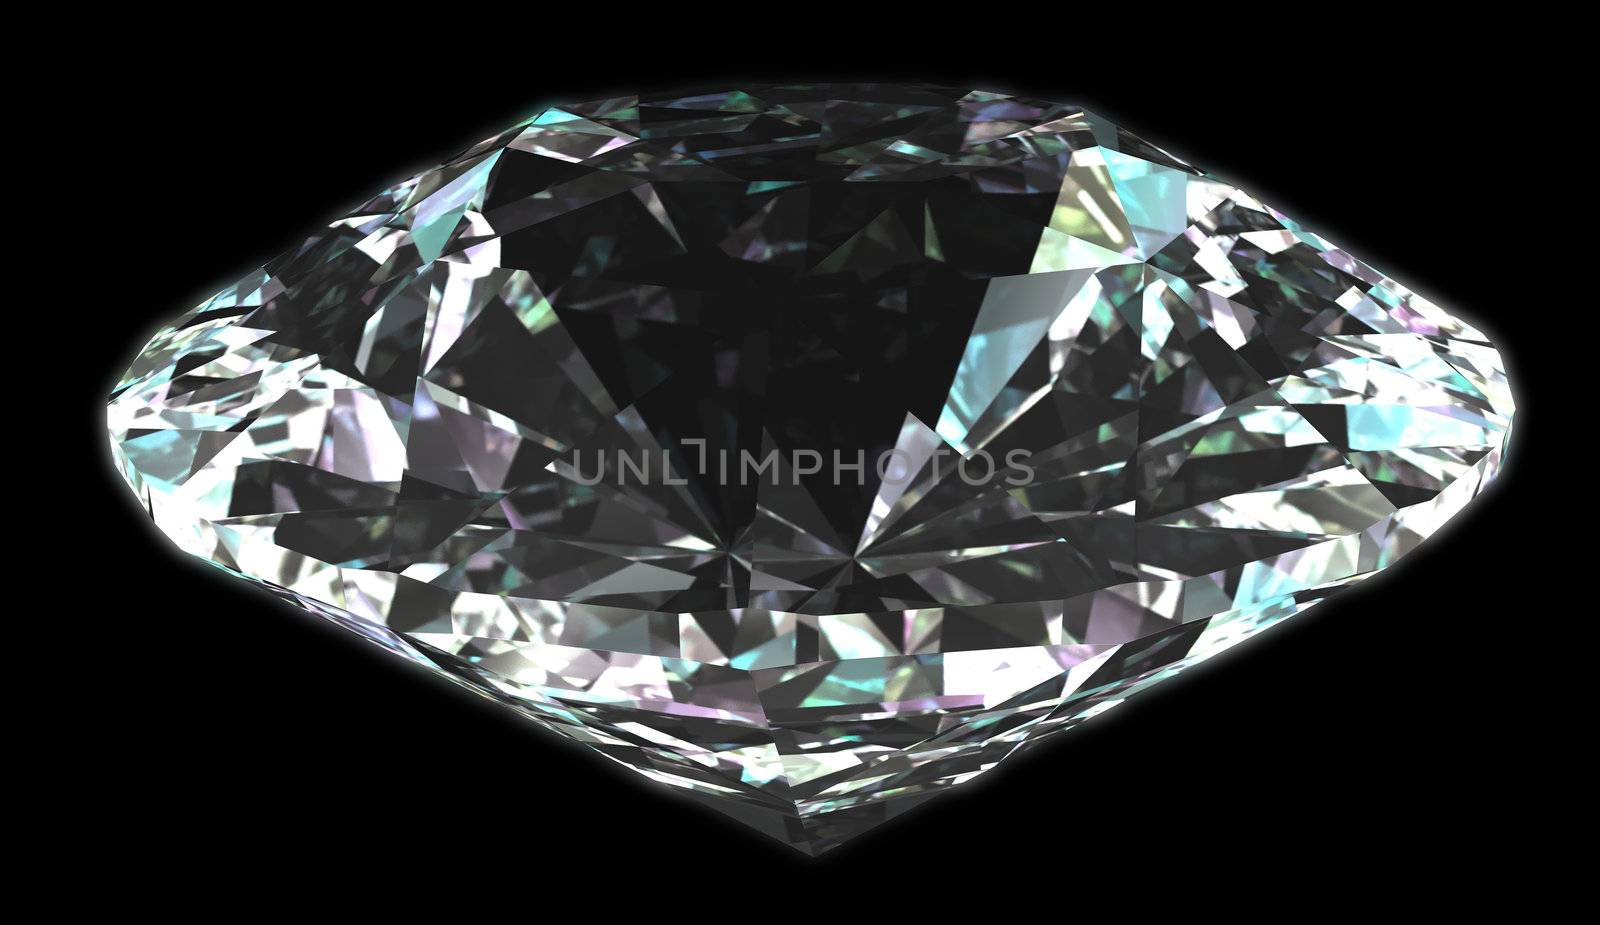 Isolated diamond with black background by ytjo